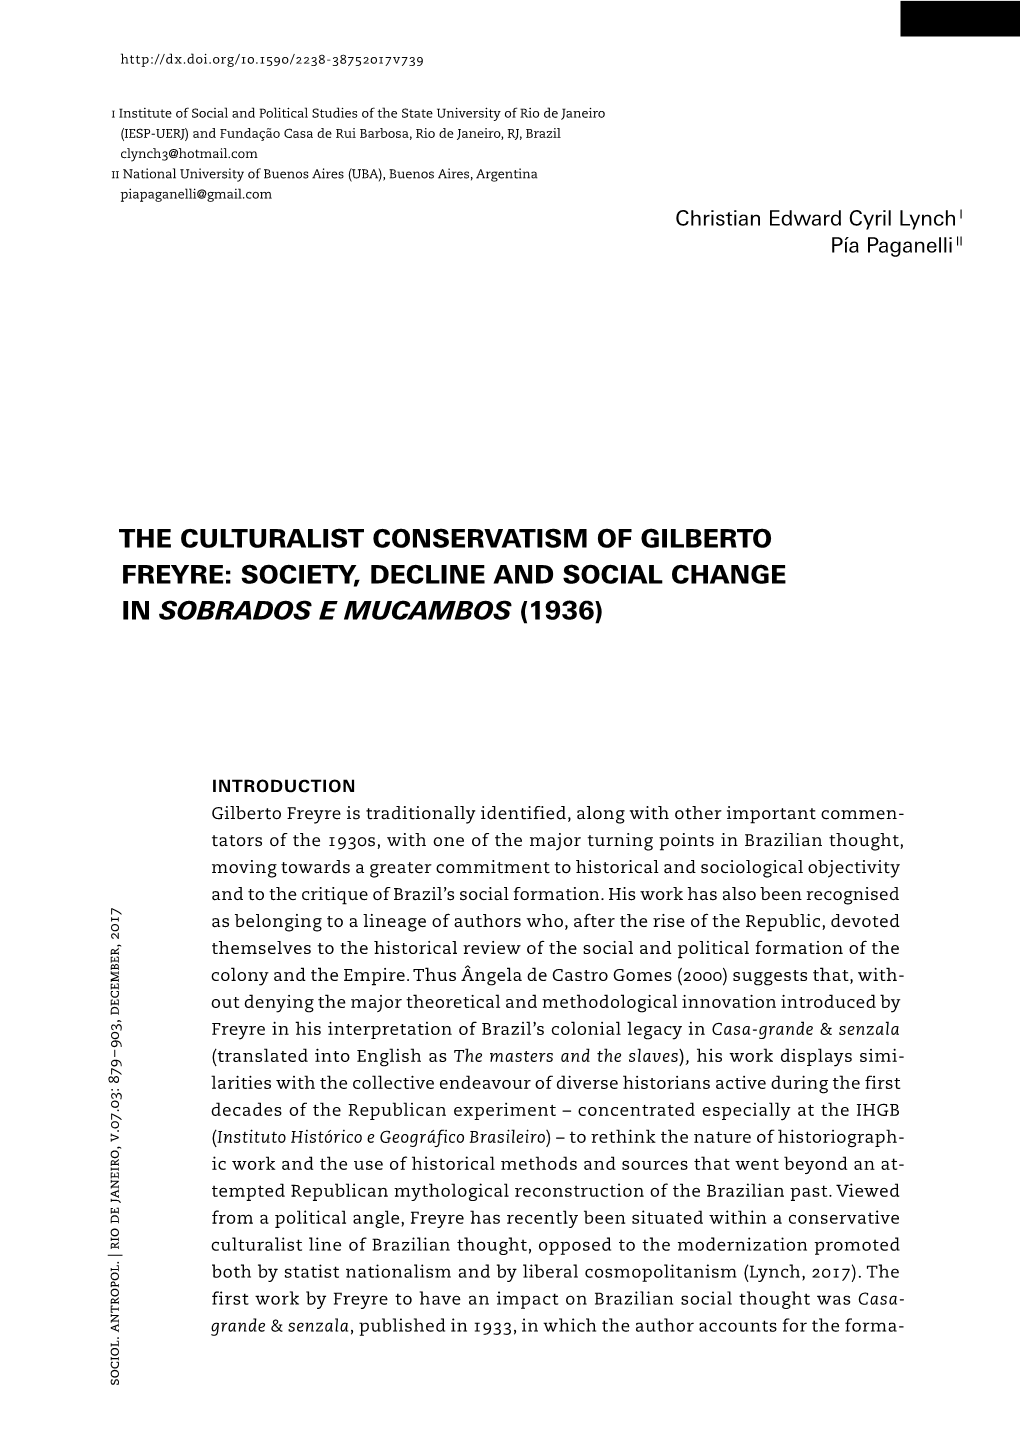 The Culturalist Conservatism of Gilberto Freyre: Society, Decline and Social Change in Sobrados E Mucambos (1936)